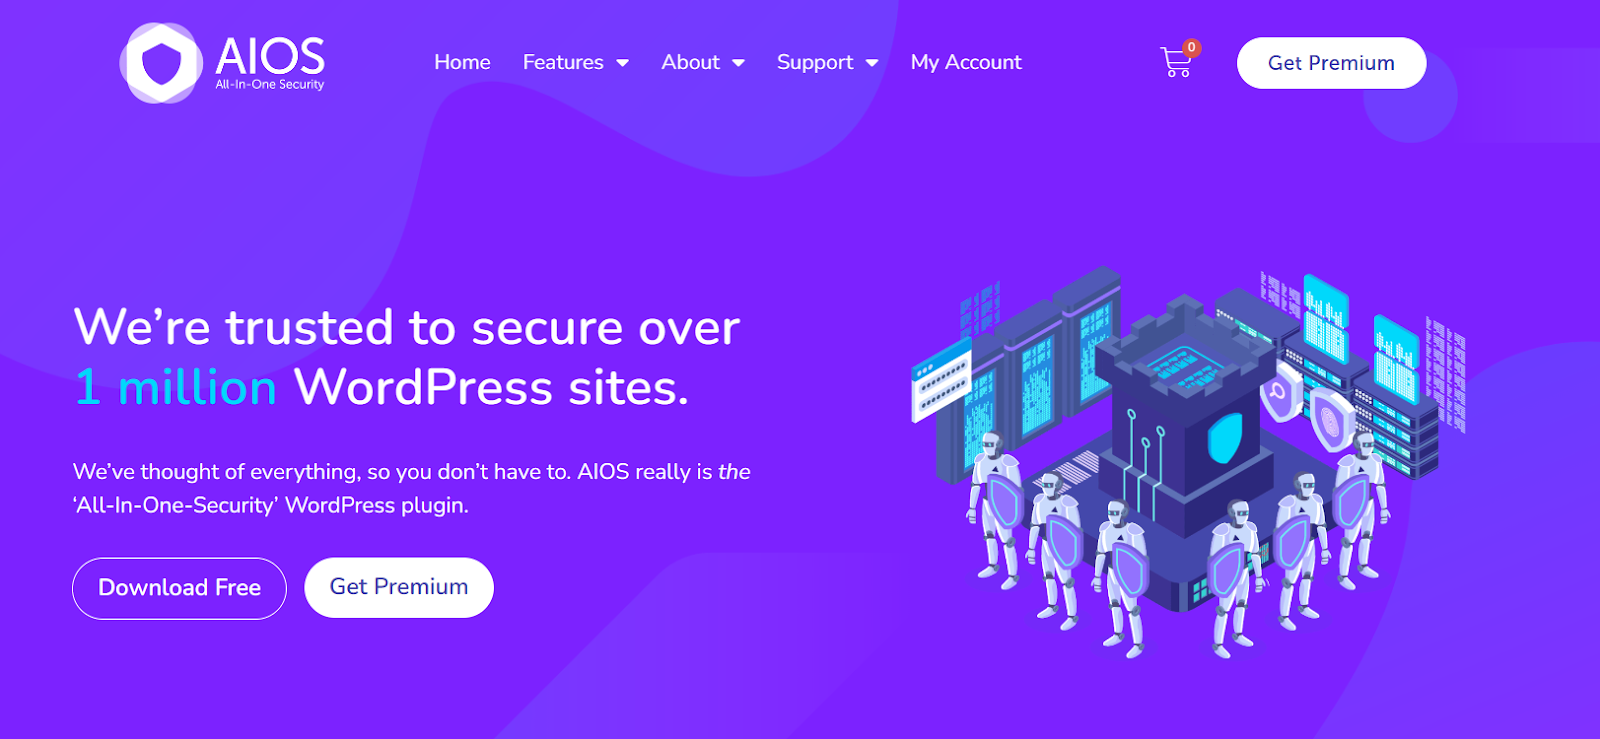 All-In-One Security (AIOS) homepage